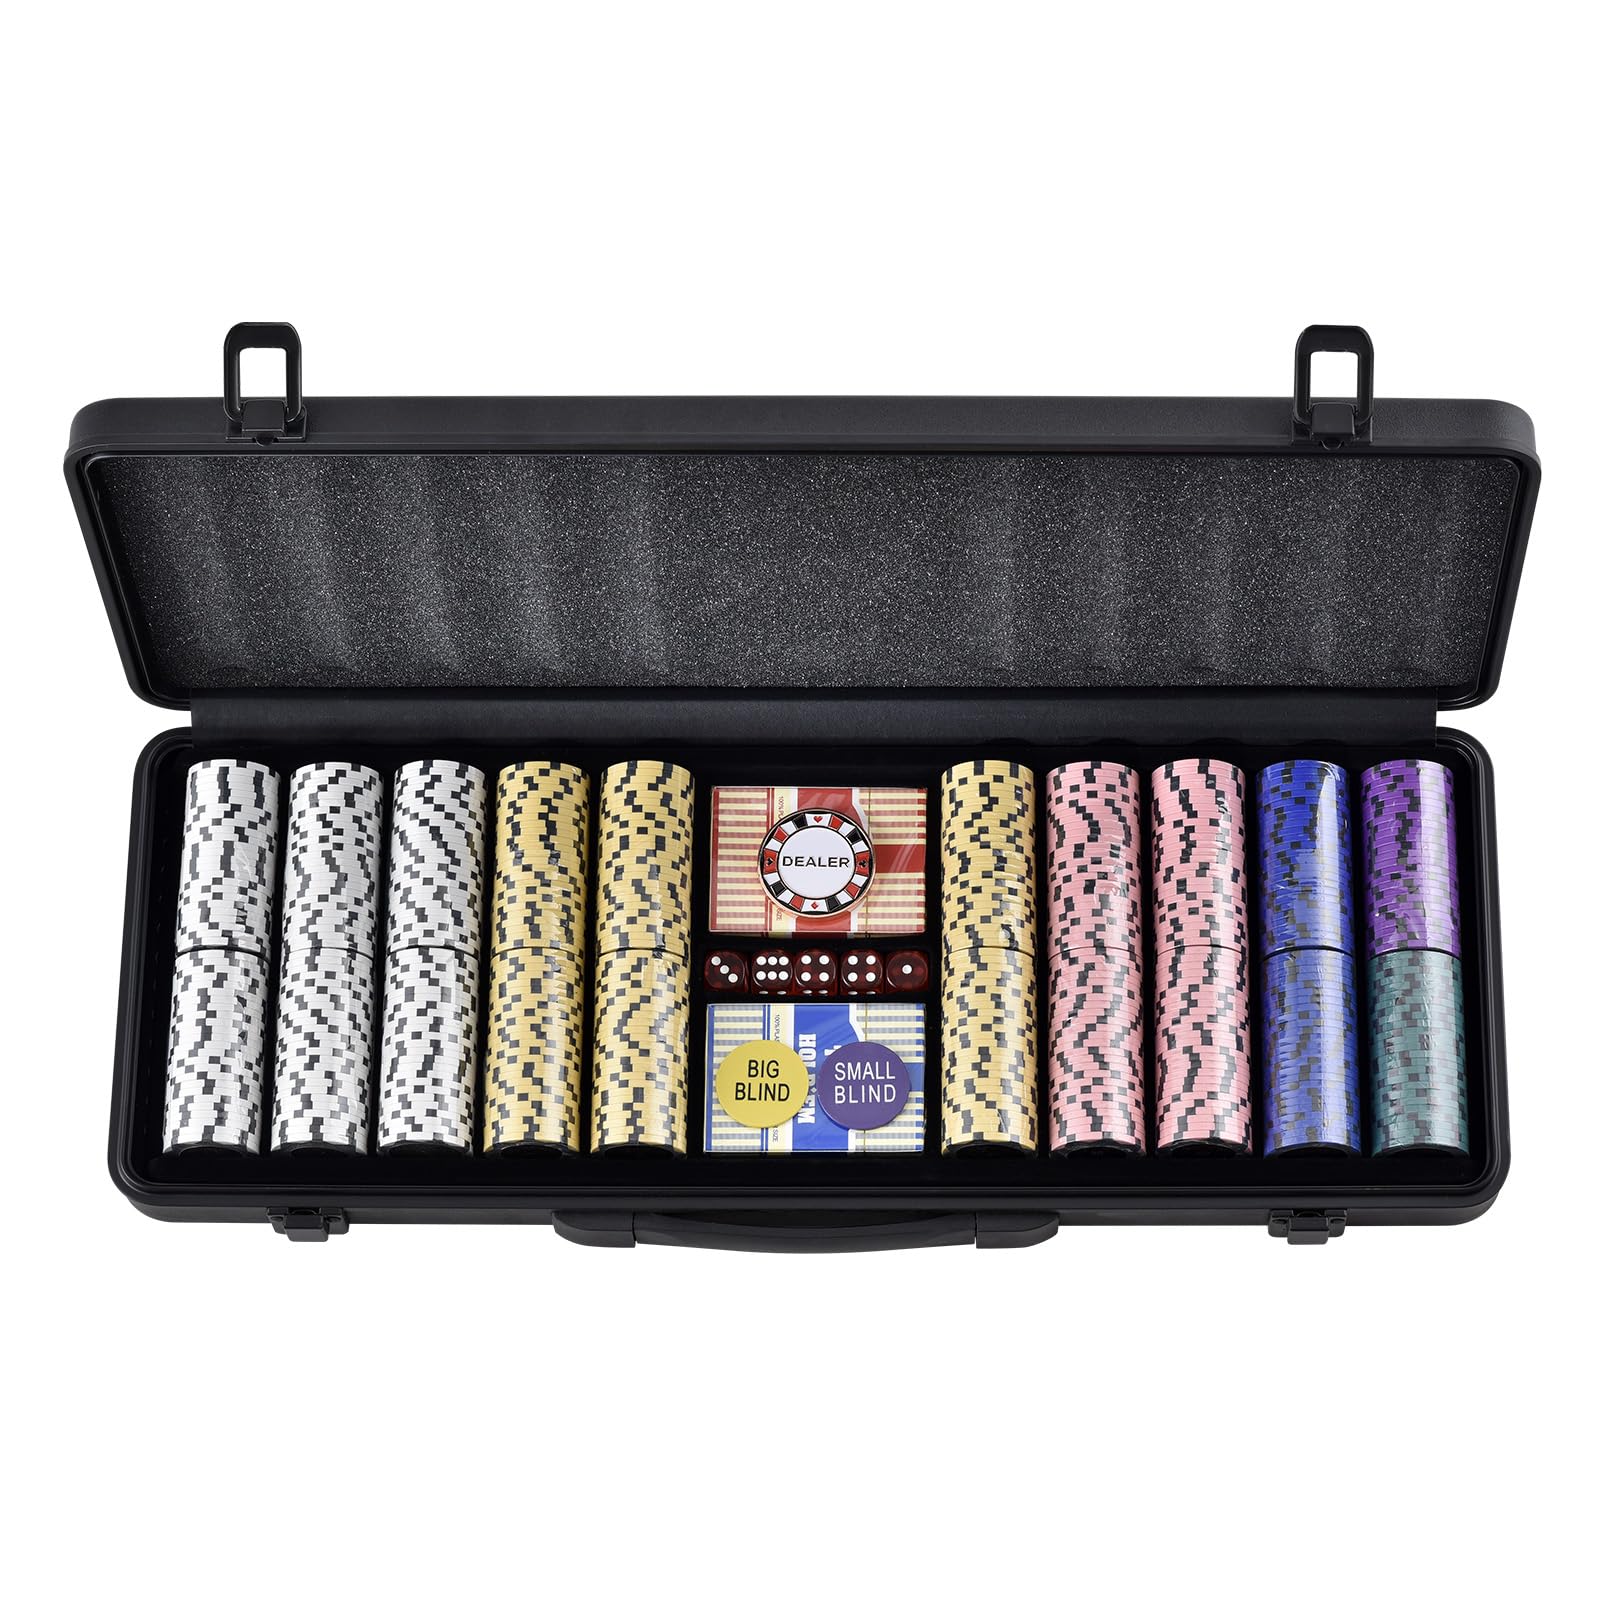 VEVOR Poker Chip Set, 500-Piece Poker Set, Complete Poker Playing Game Set with Carrying Case, Heavyweight 14 Gram Casino Clay Chips, Cards, Buttons and Dices, for Texas Hold'em, Blackjack, Gambling